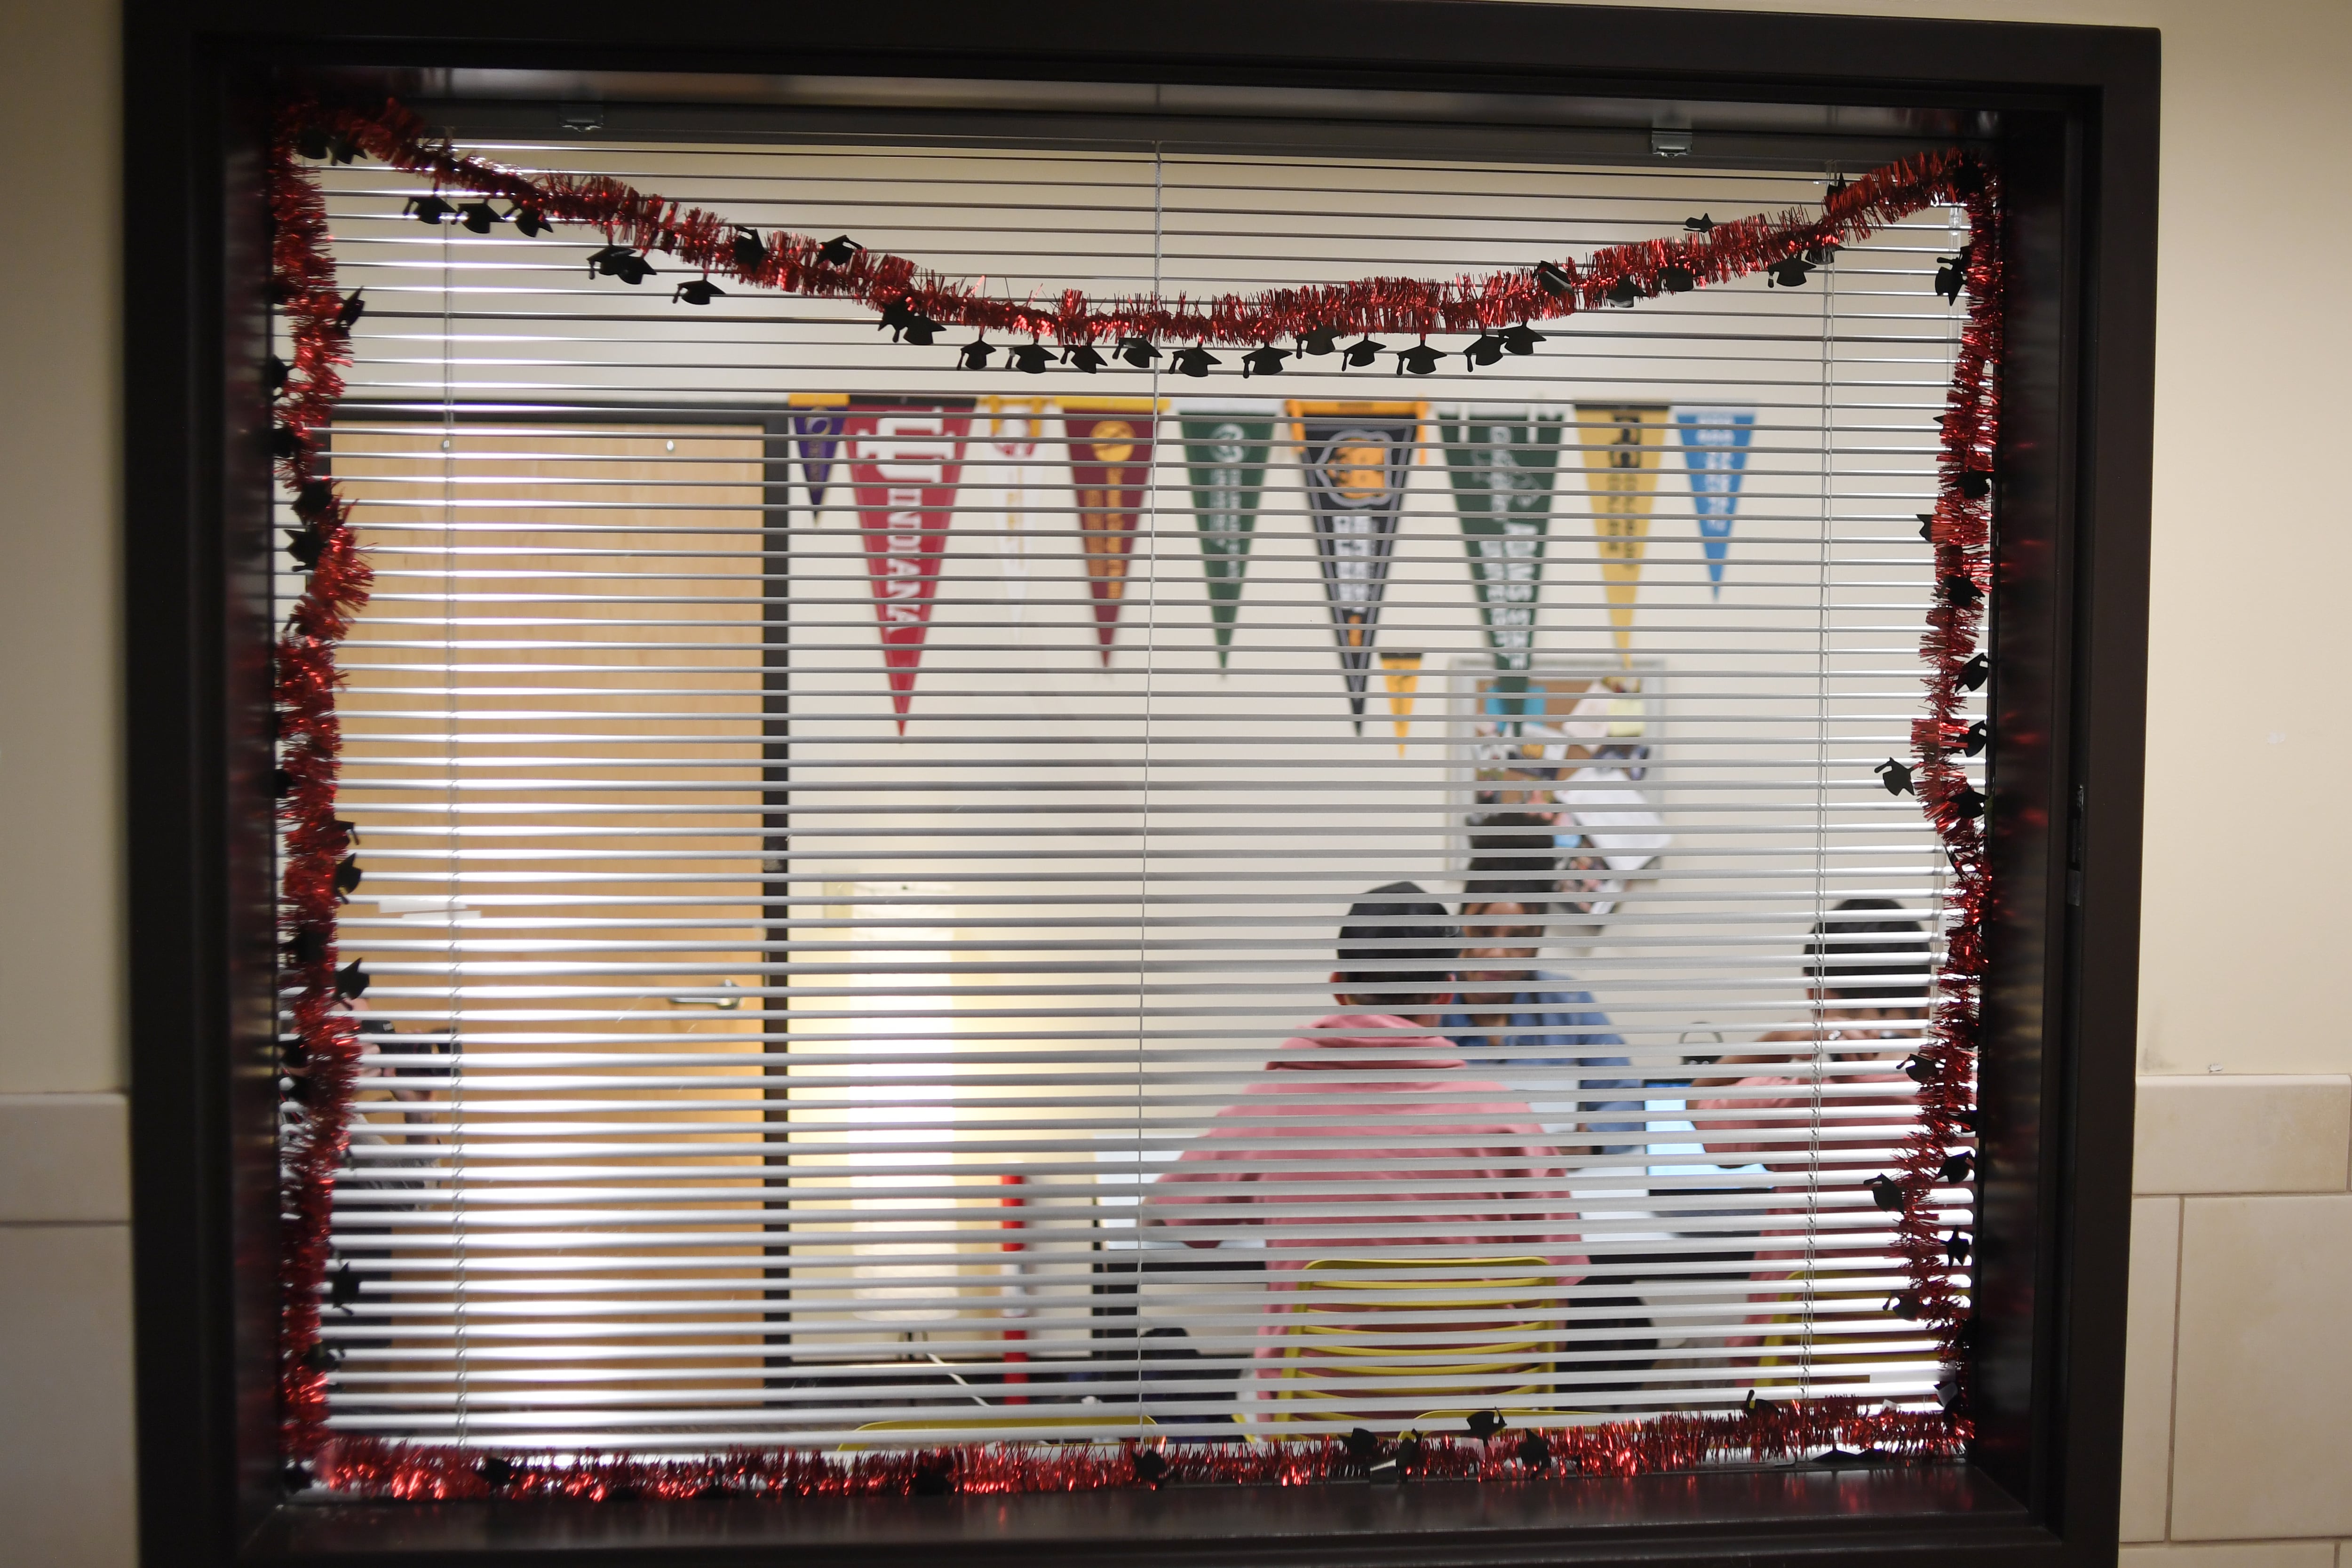 Students speak with a career counselor, seen behind a window with white blinds.